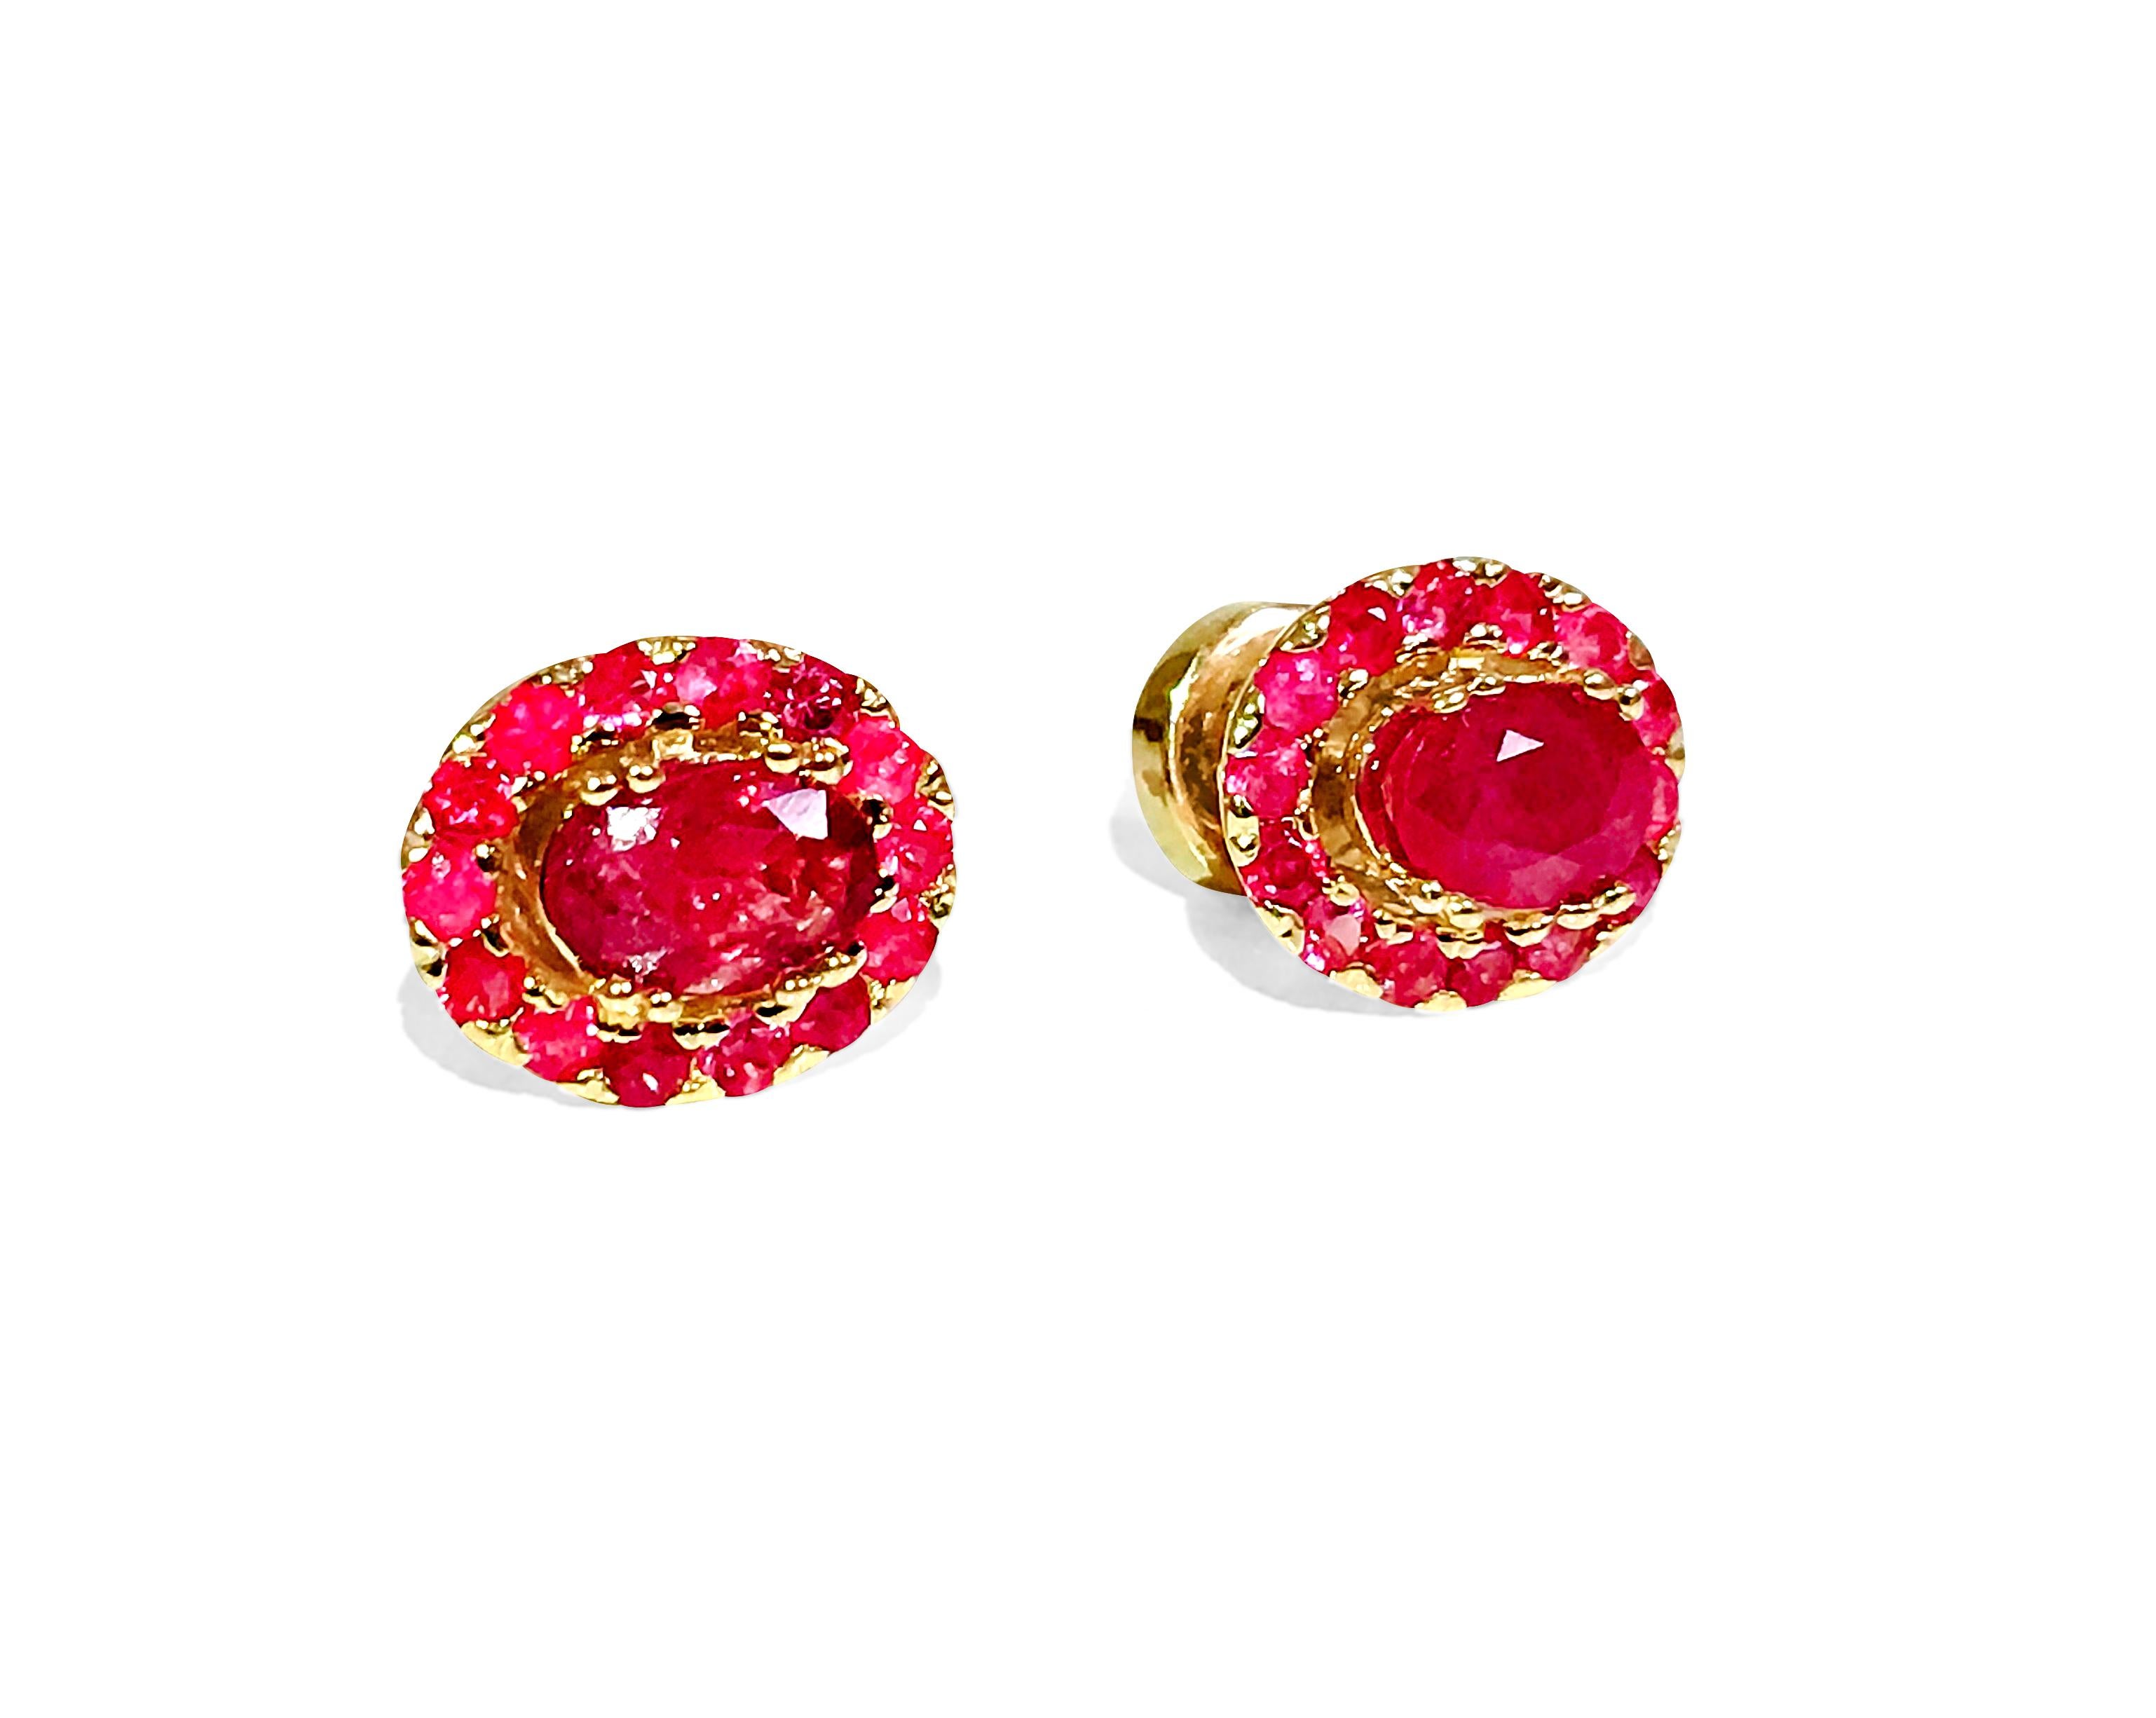 Contemporary 3.12ct Natural Ruby Stud Earrings 14K Gold For Sale